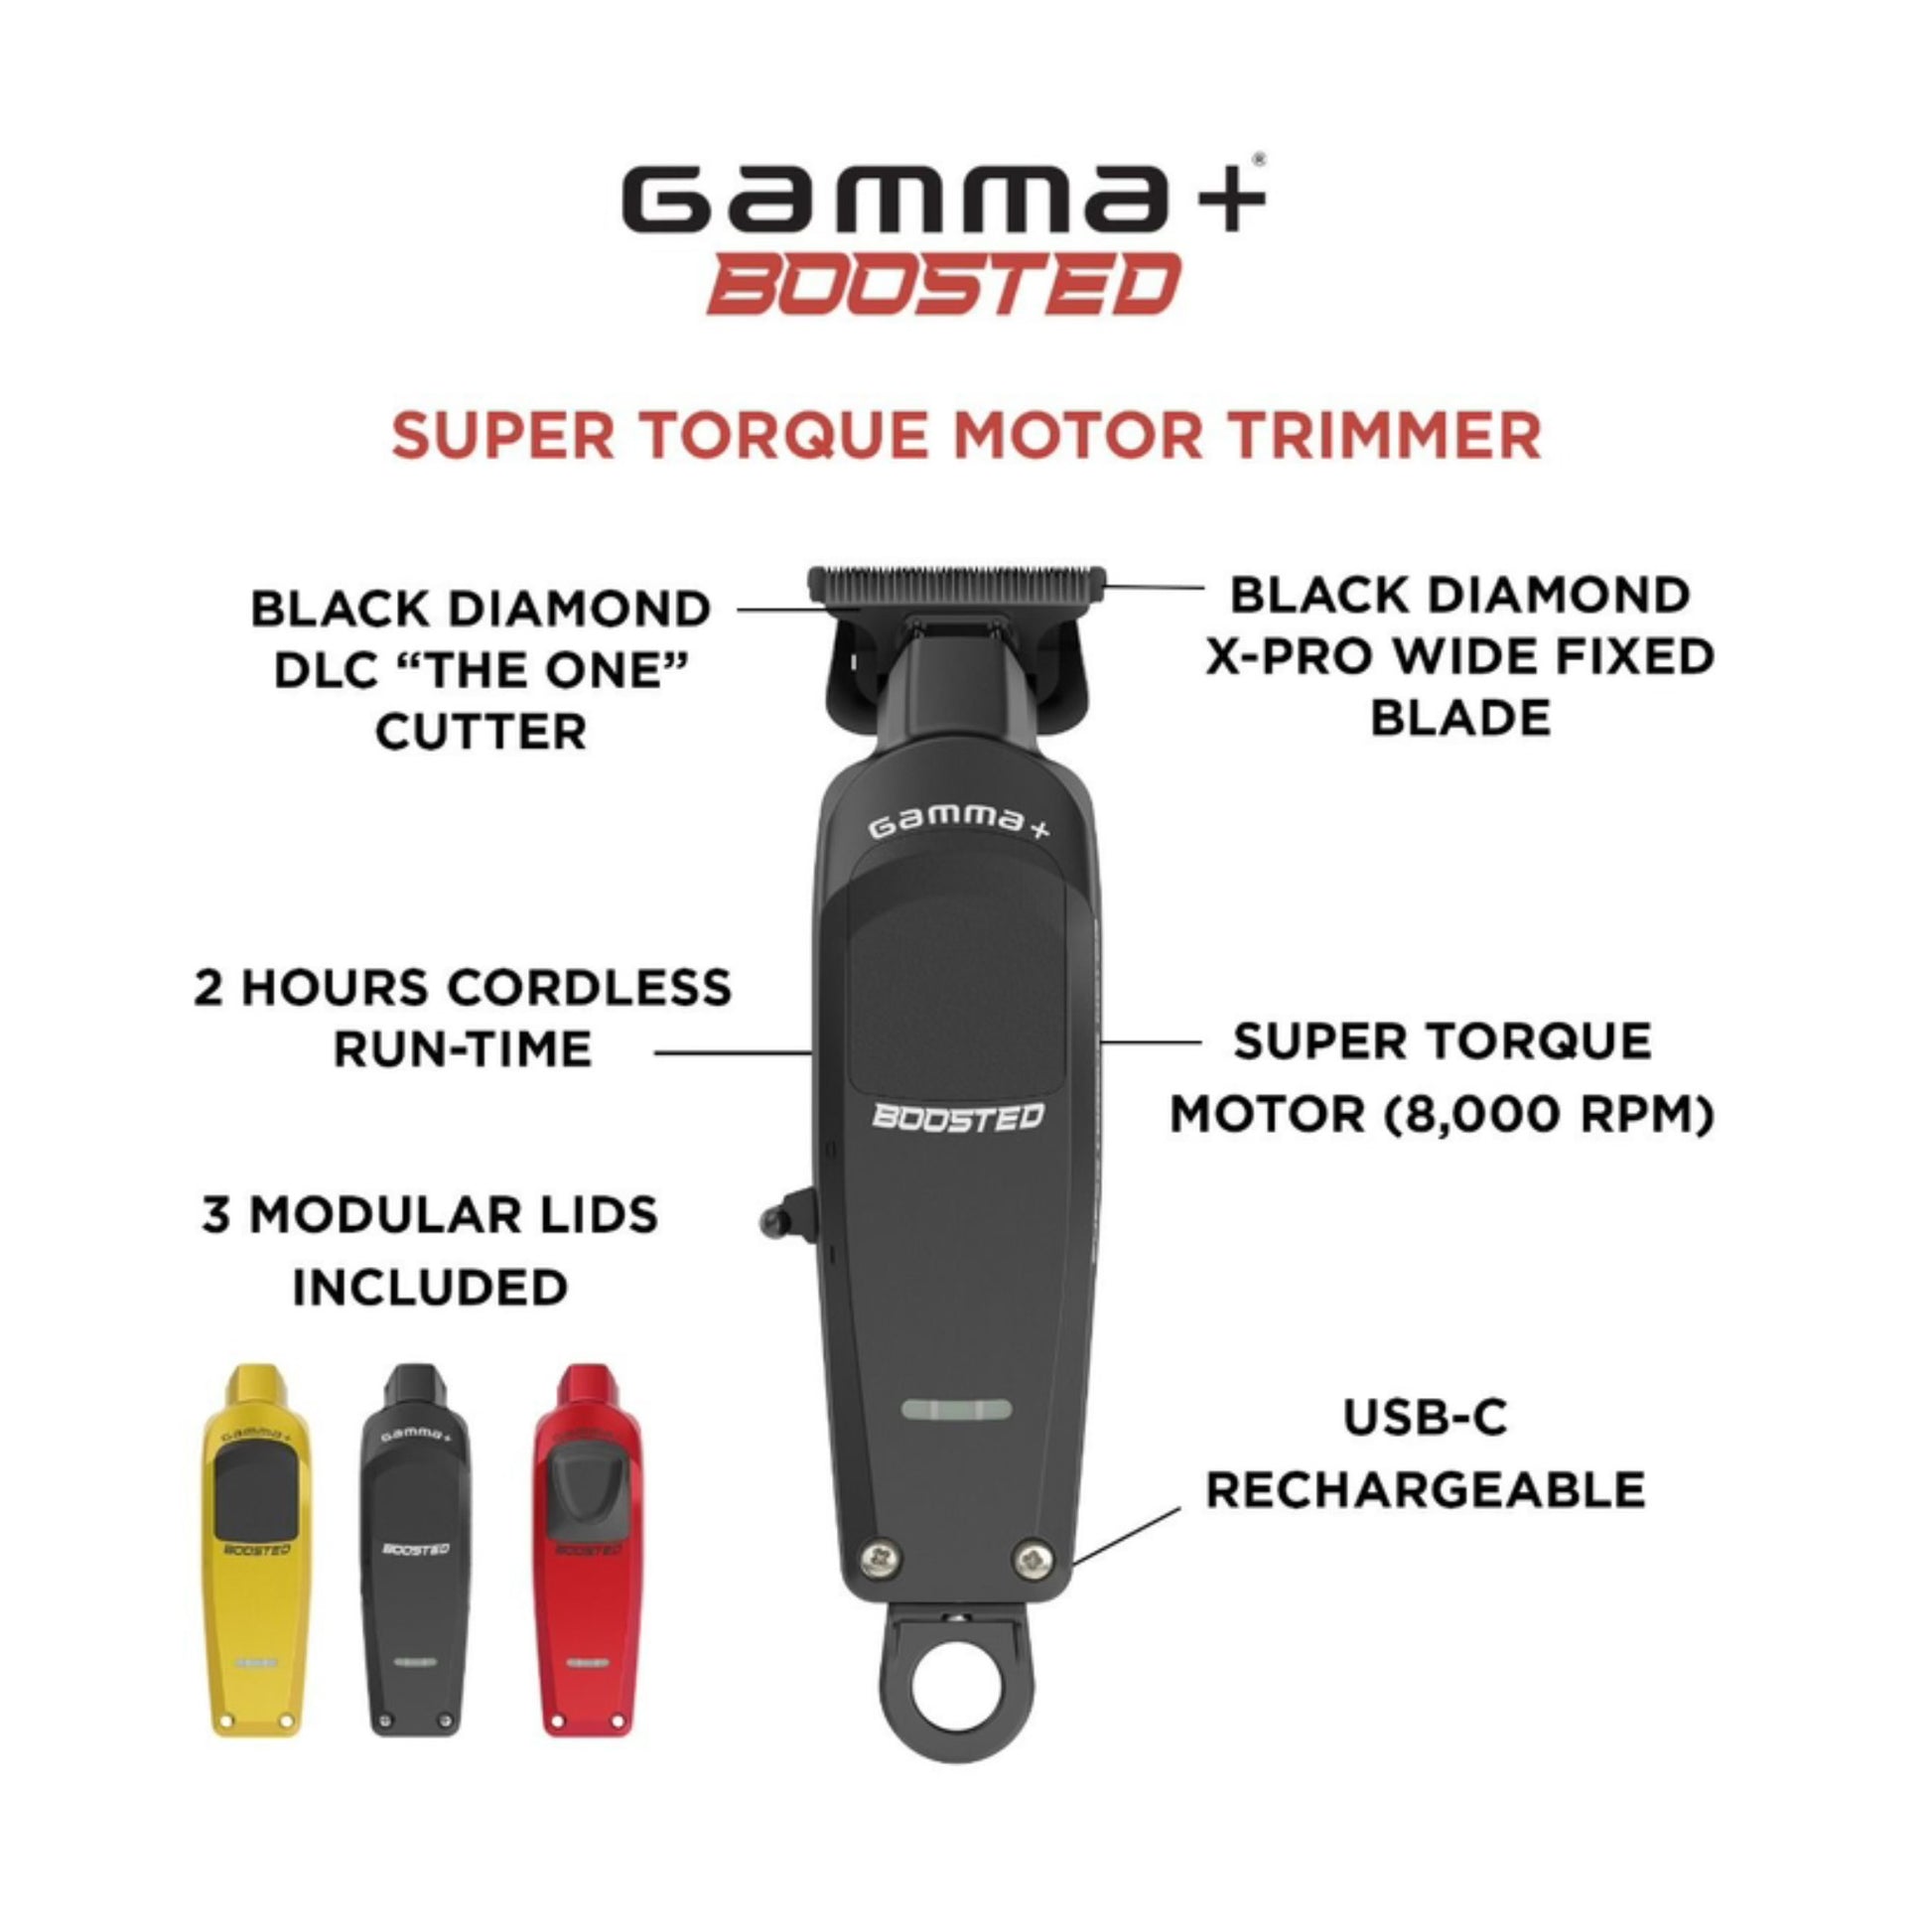 Gamma+ Boosted Trimmer Information